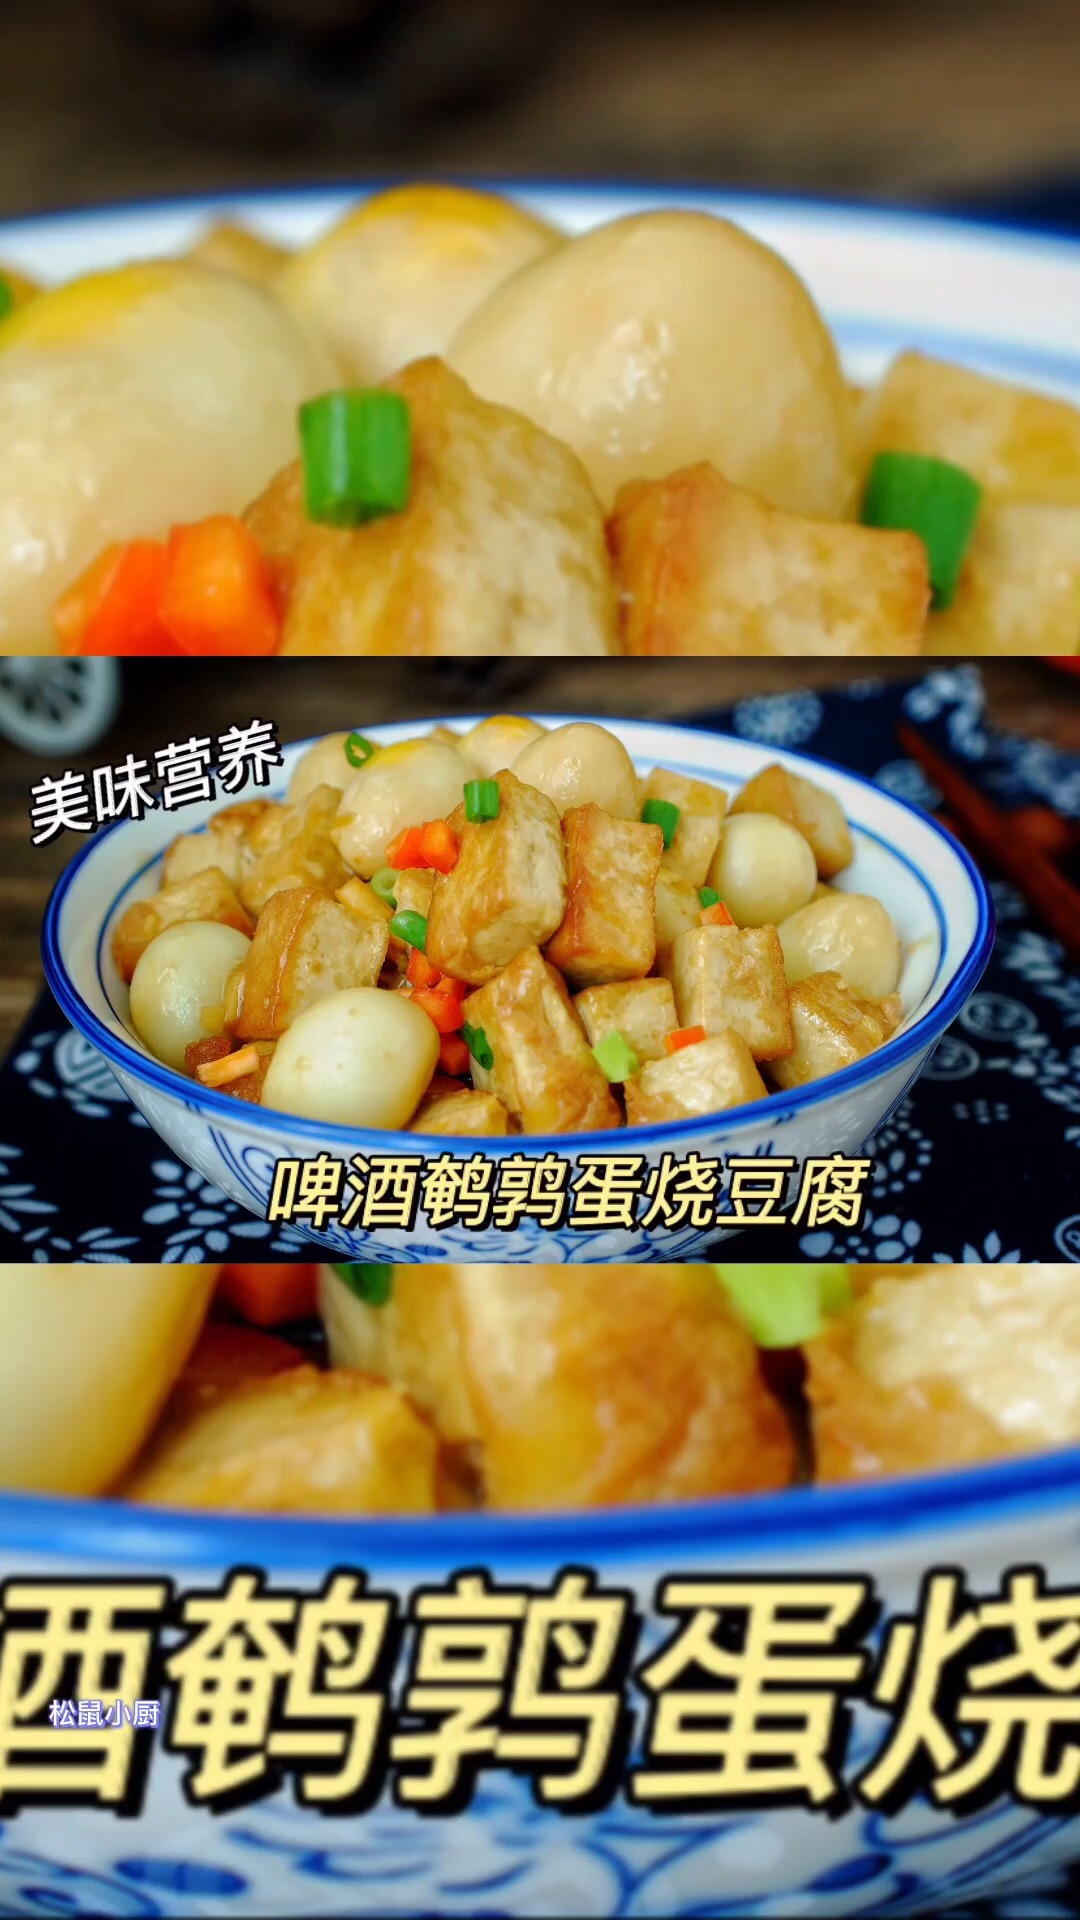 Braised Tofu with Beer and Quail Eggs recipe